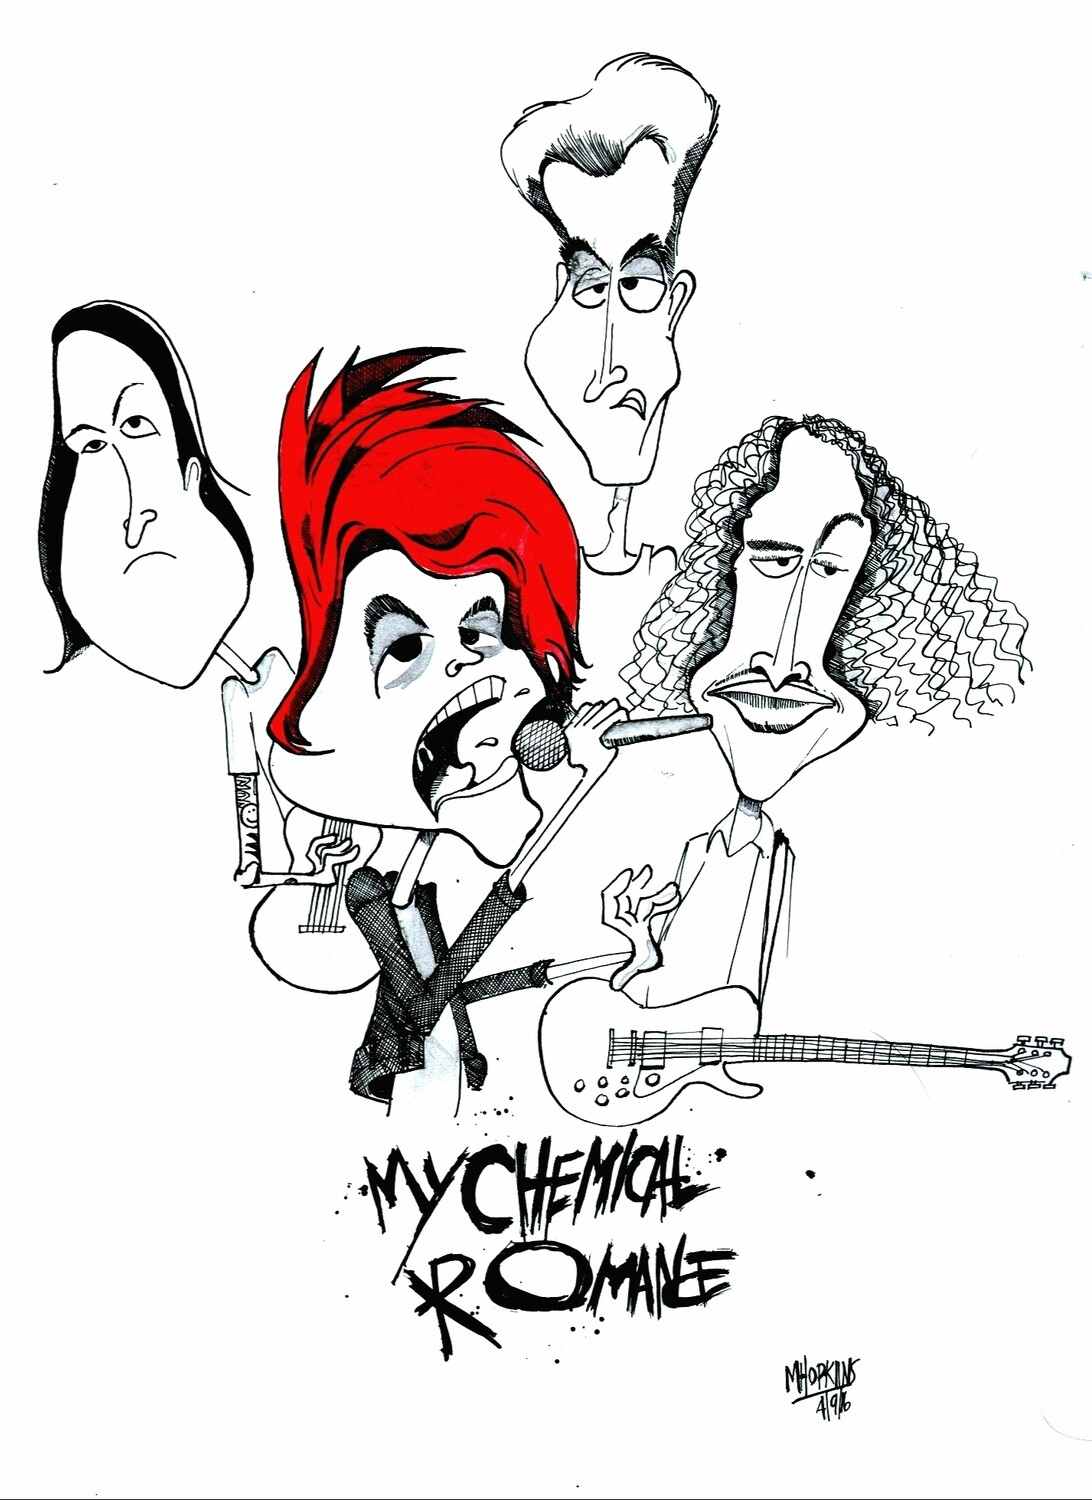 My Chemical Romance - 12"x 15 3/4" Original Pen and Ink Caricature by Michael Hopkins.